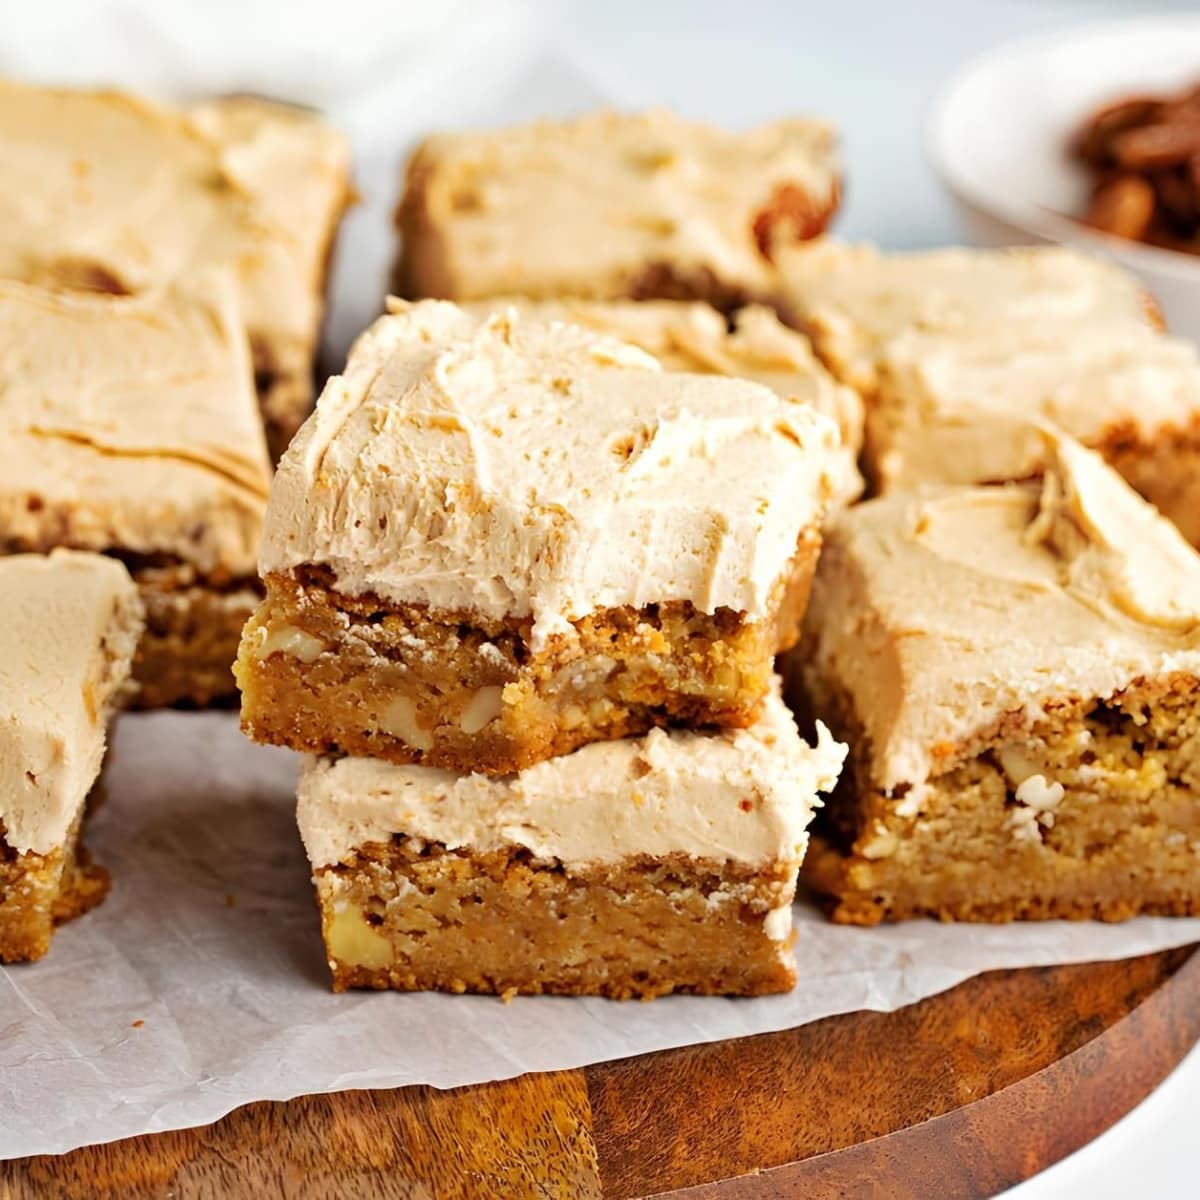 Sweet and Salty Butterscotch Brownies on a Wooden Board